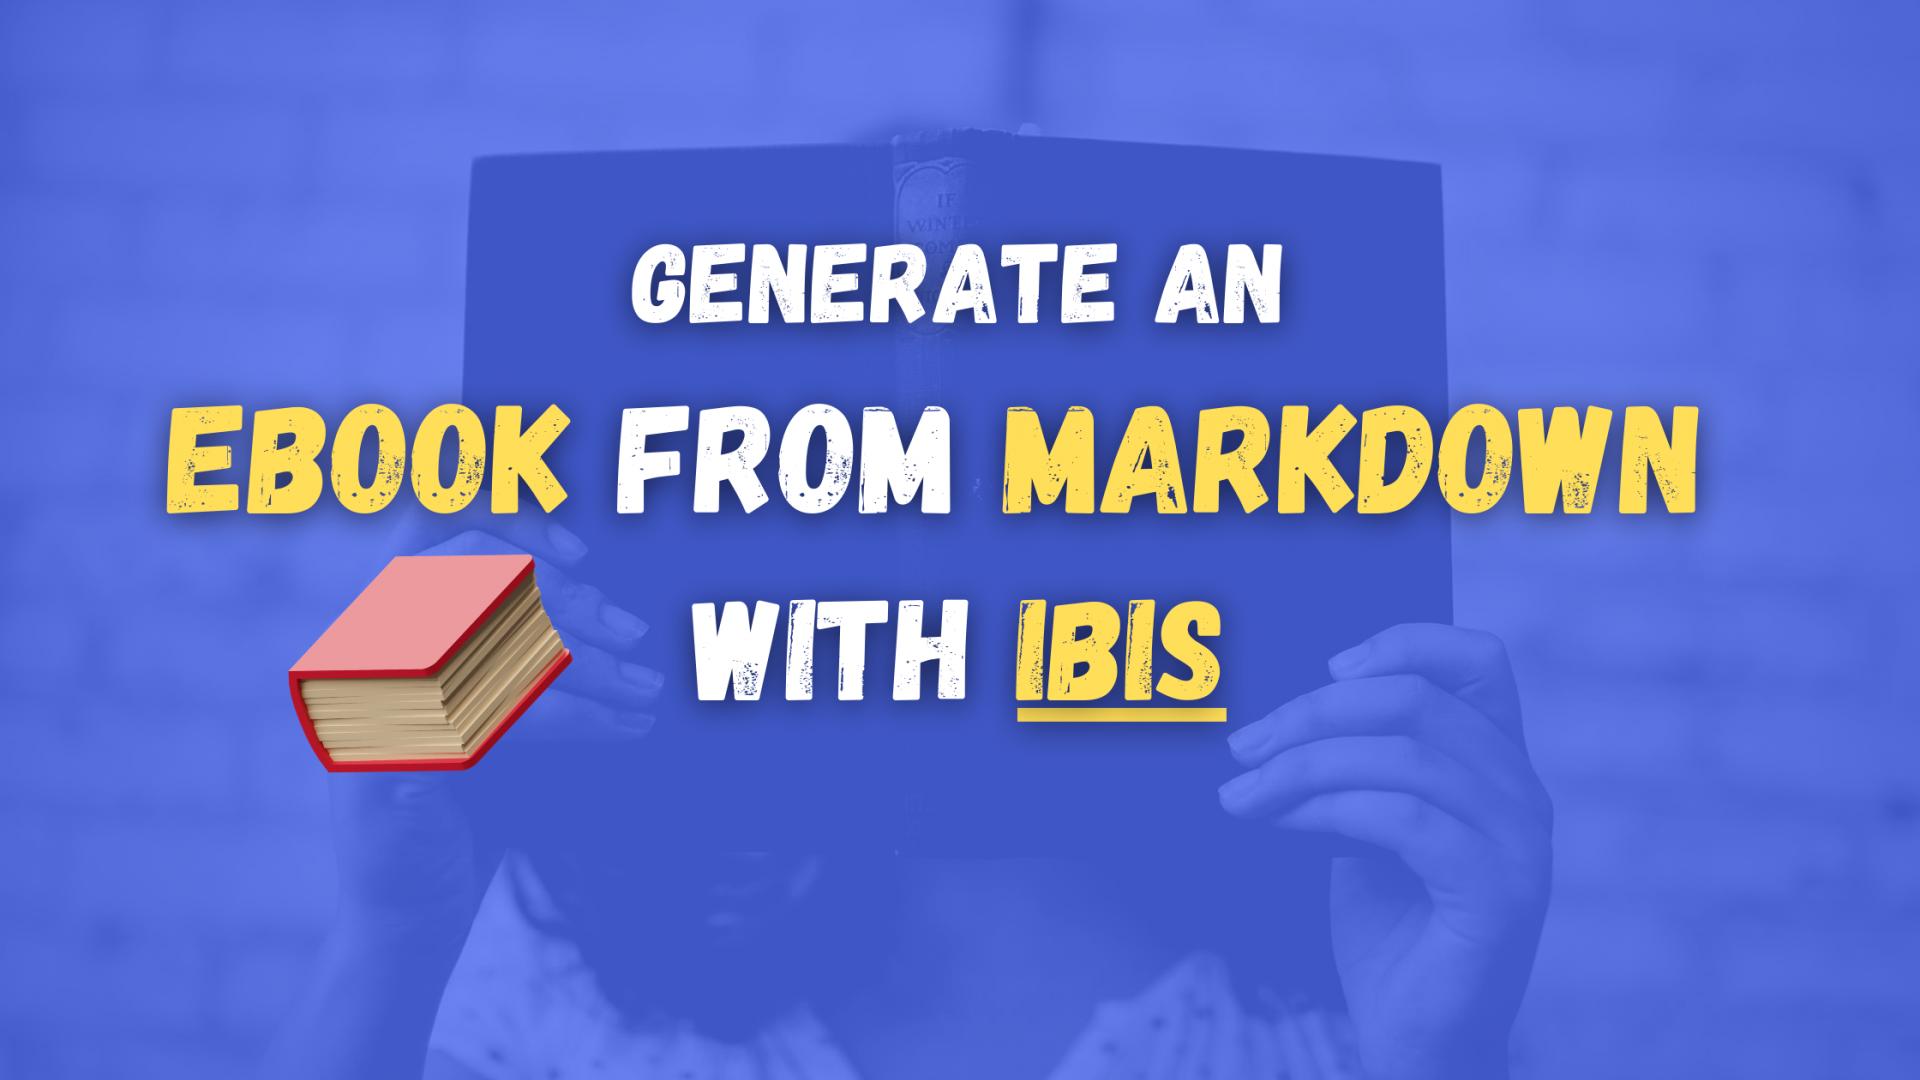 How to create an eBook from Markdown using Ibis?